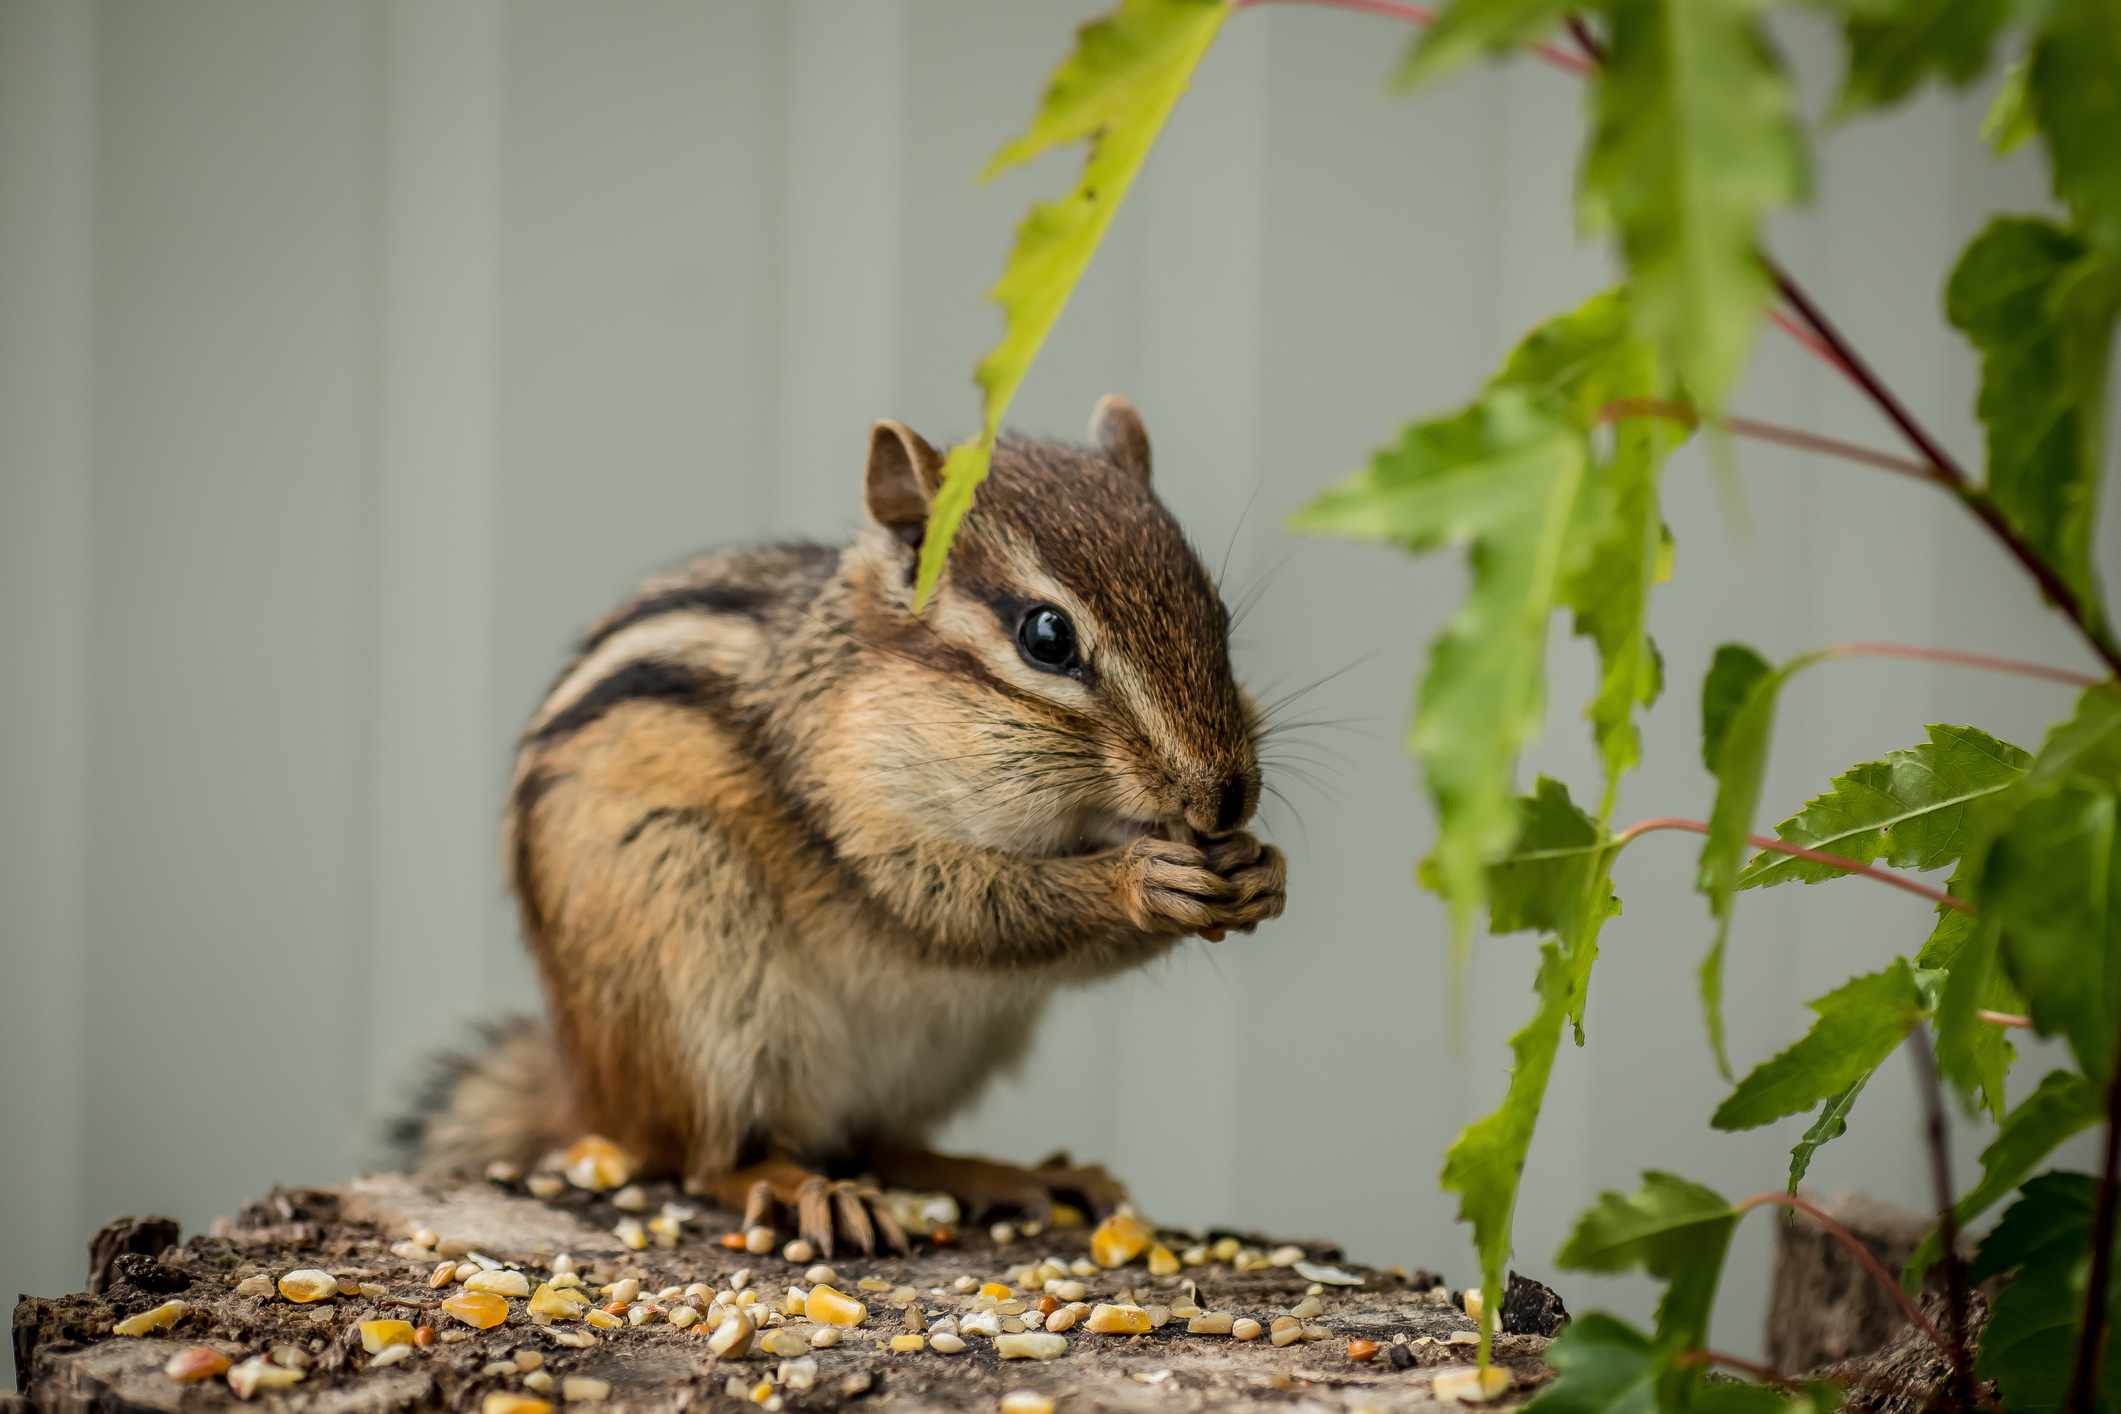 How to keep chipmunks away naturally?